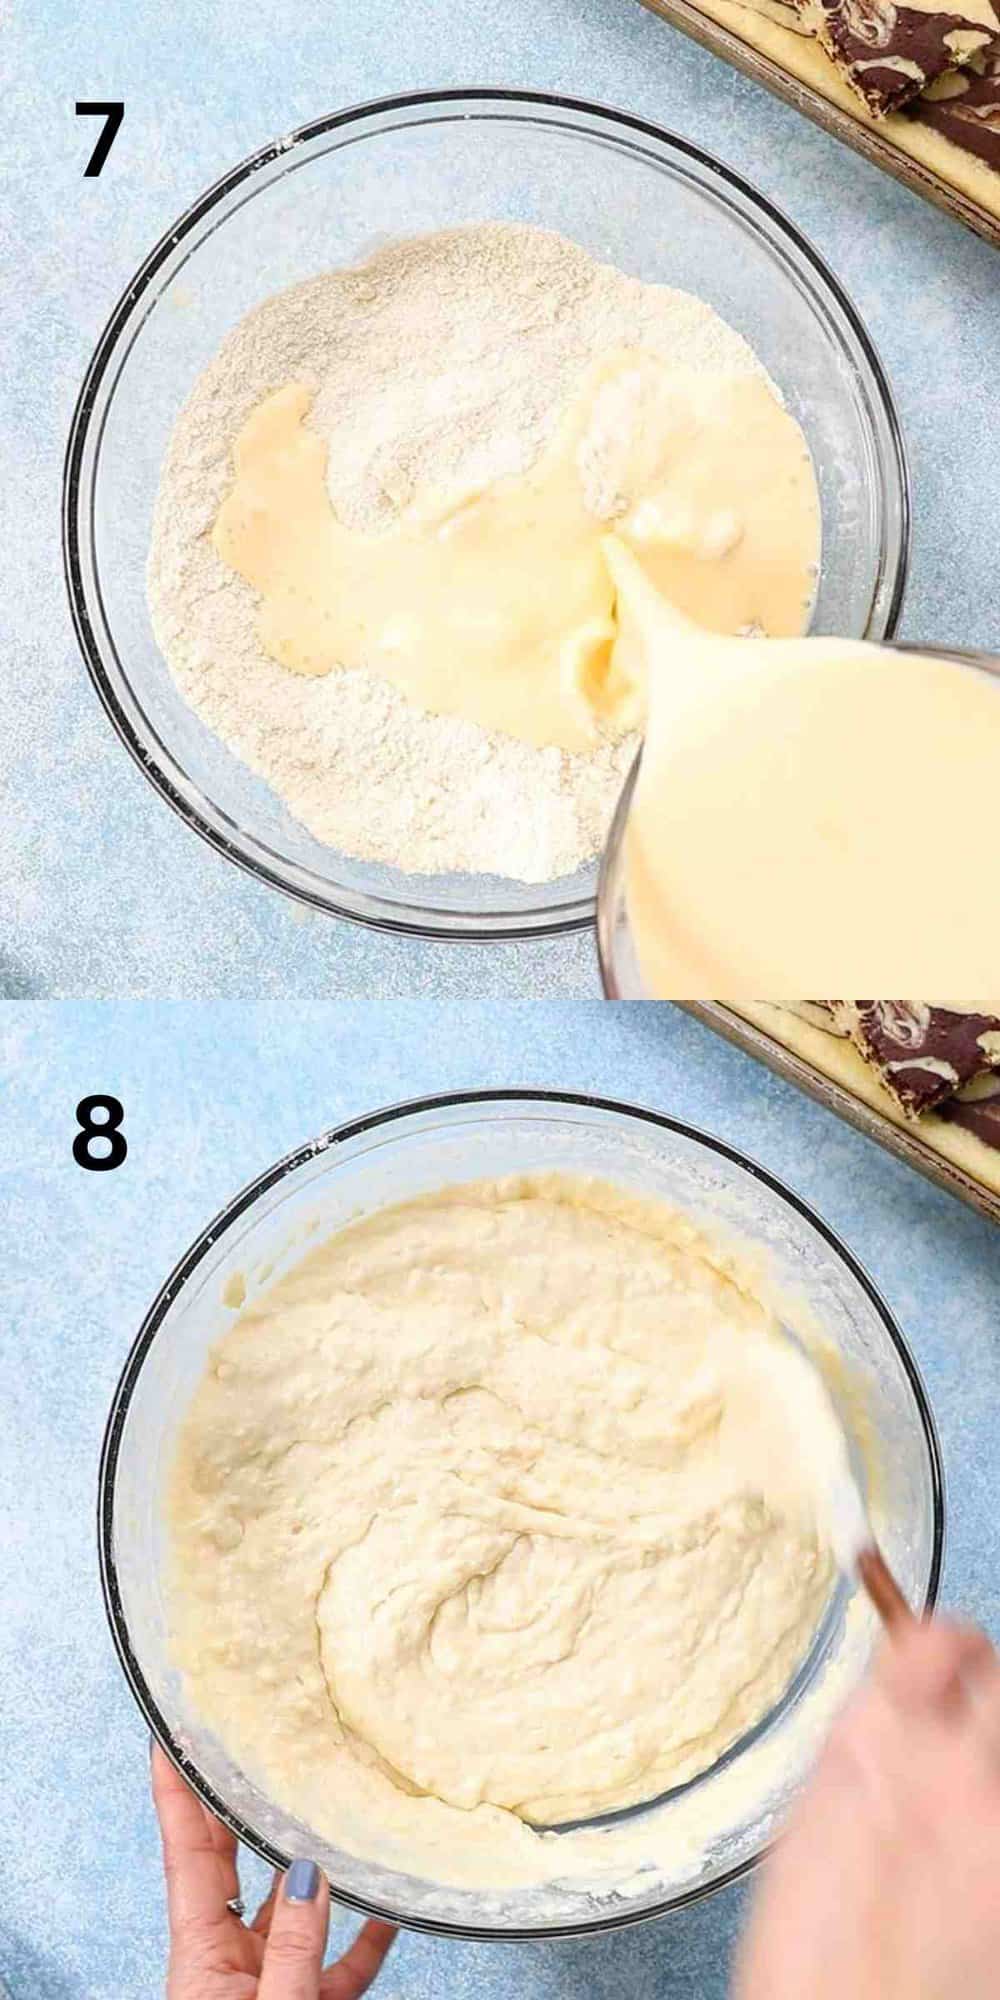 2 photo collage of pouring and mixing buttermilk into the flour in a glass bowl.